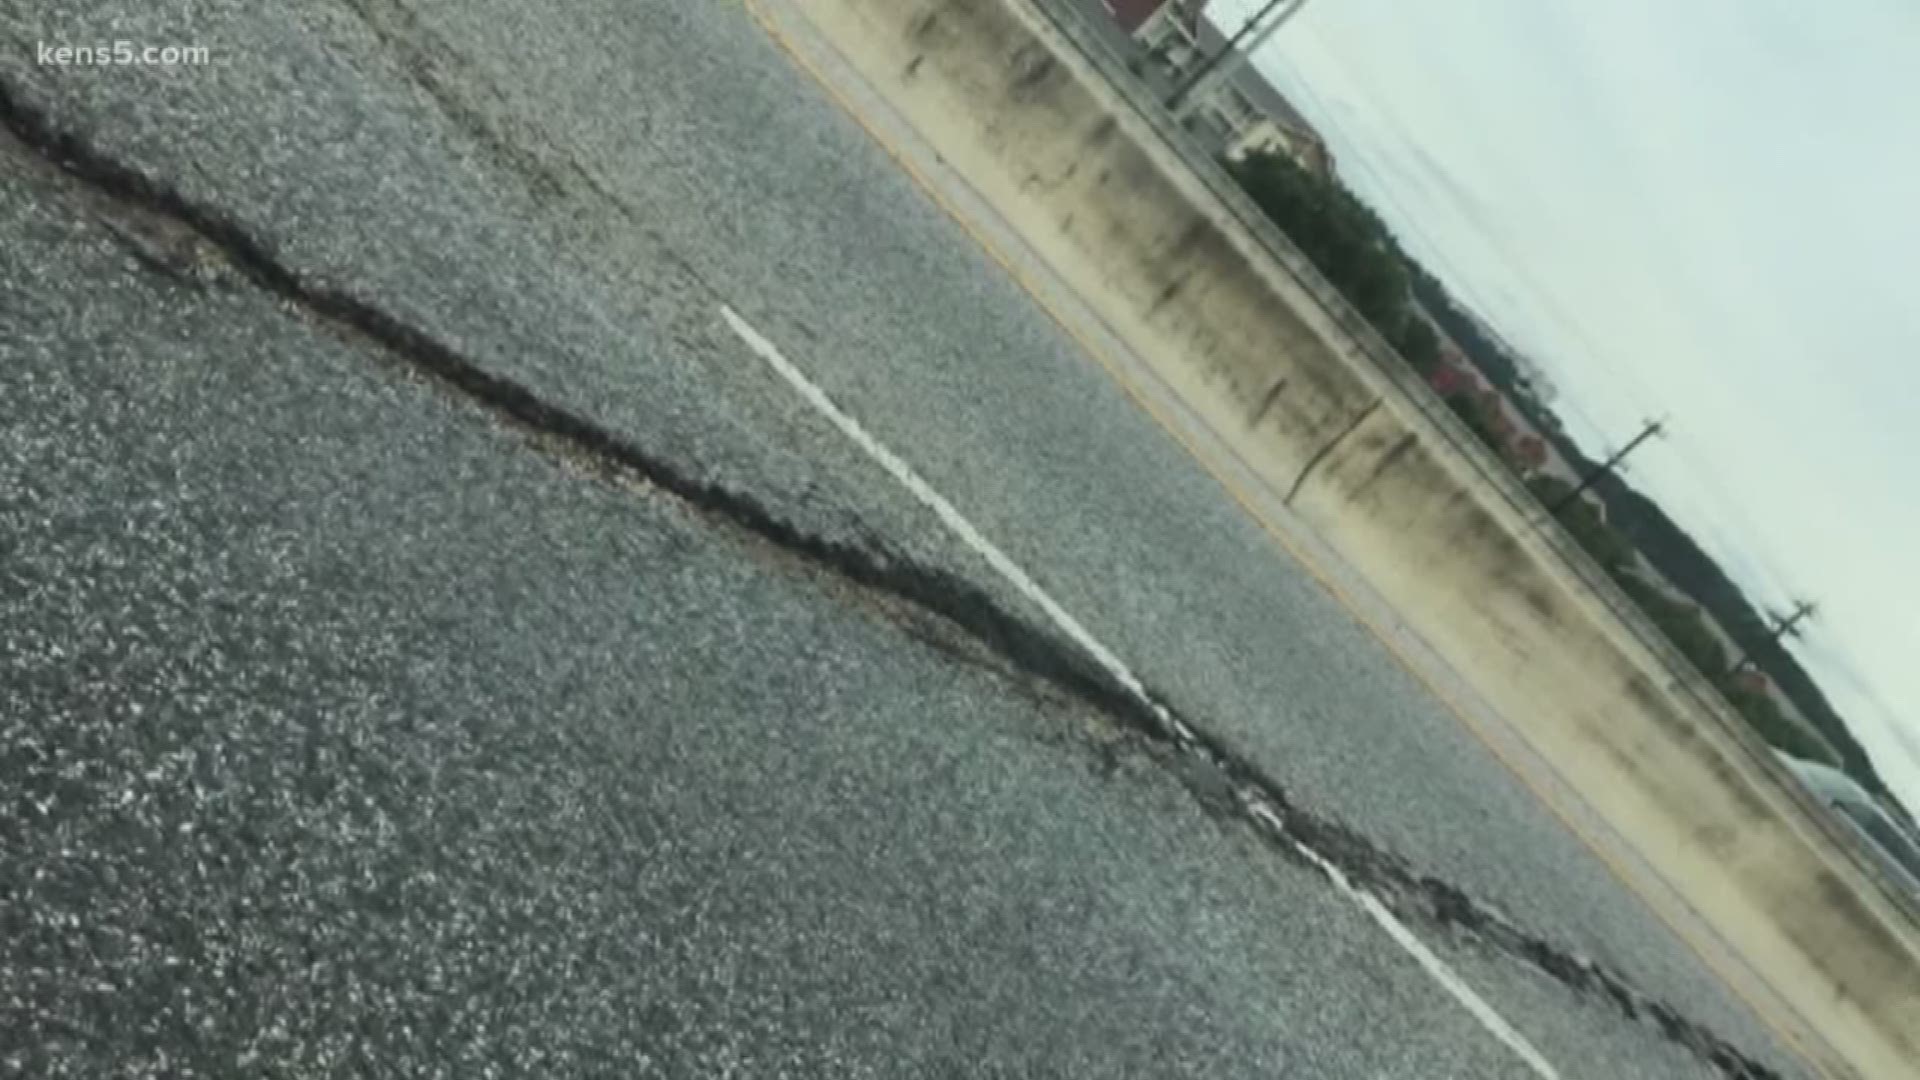 Tens of thousands of cars travel San Antonio roads every day. TxDOT does its best to keep our roadways safe. But it never hurts for drivers to keep an eye out for possible problems. Eyewitness news reporter Jeremy Baker has more.